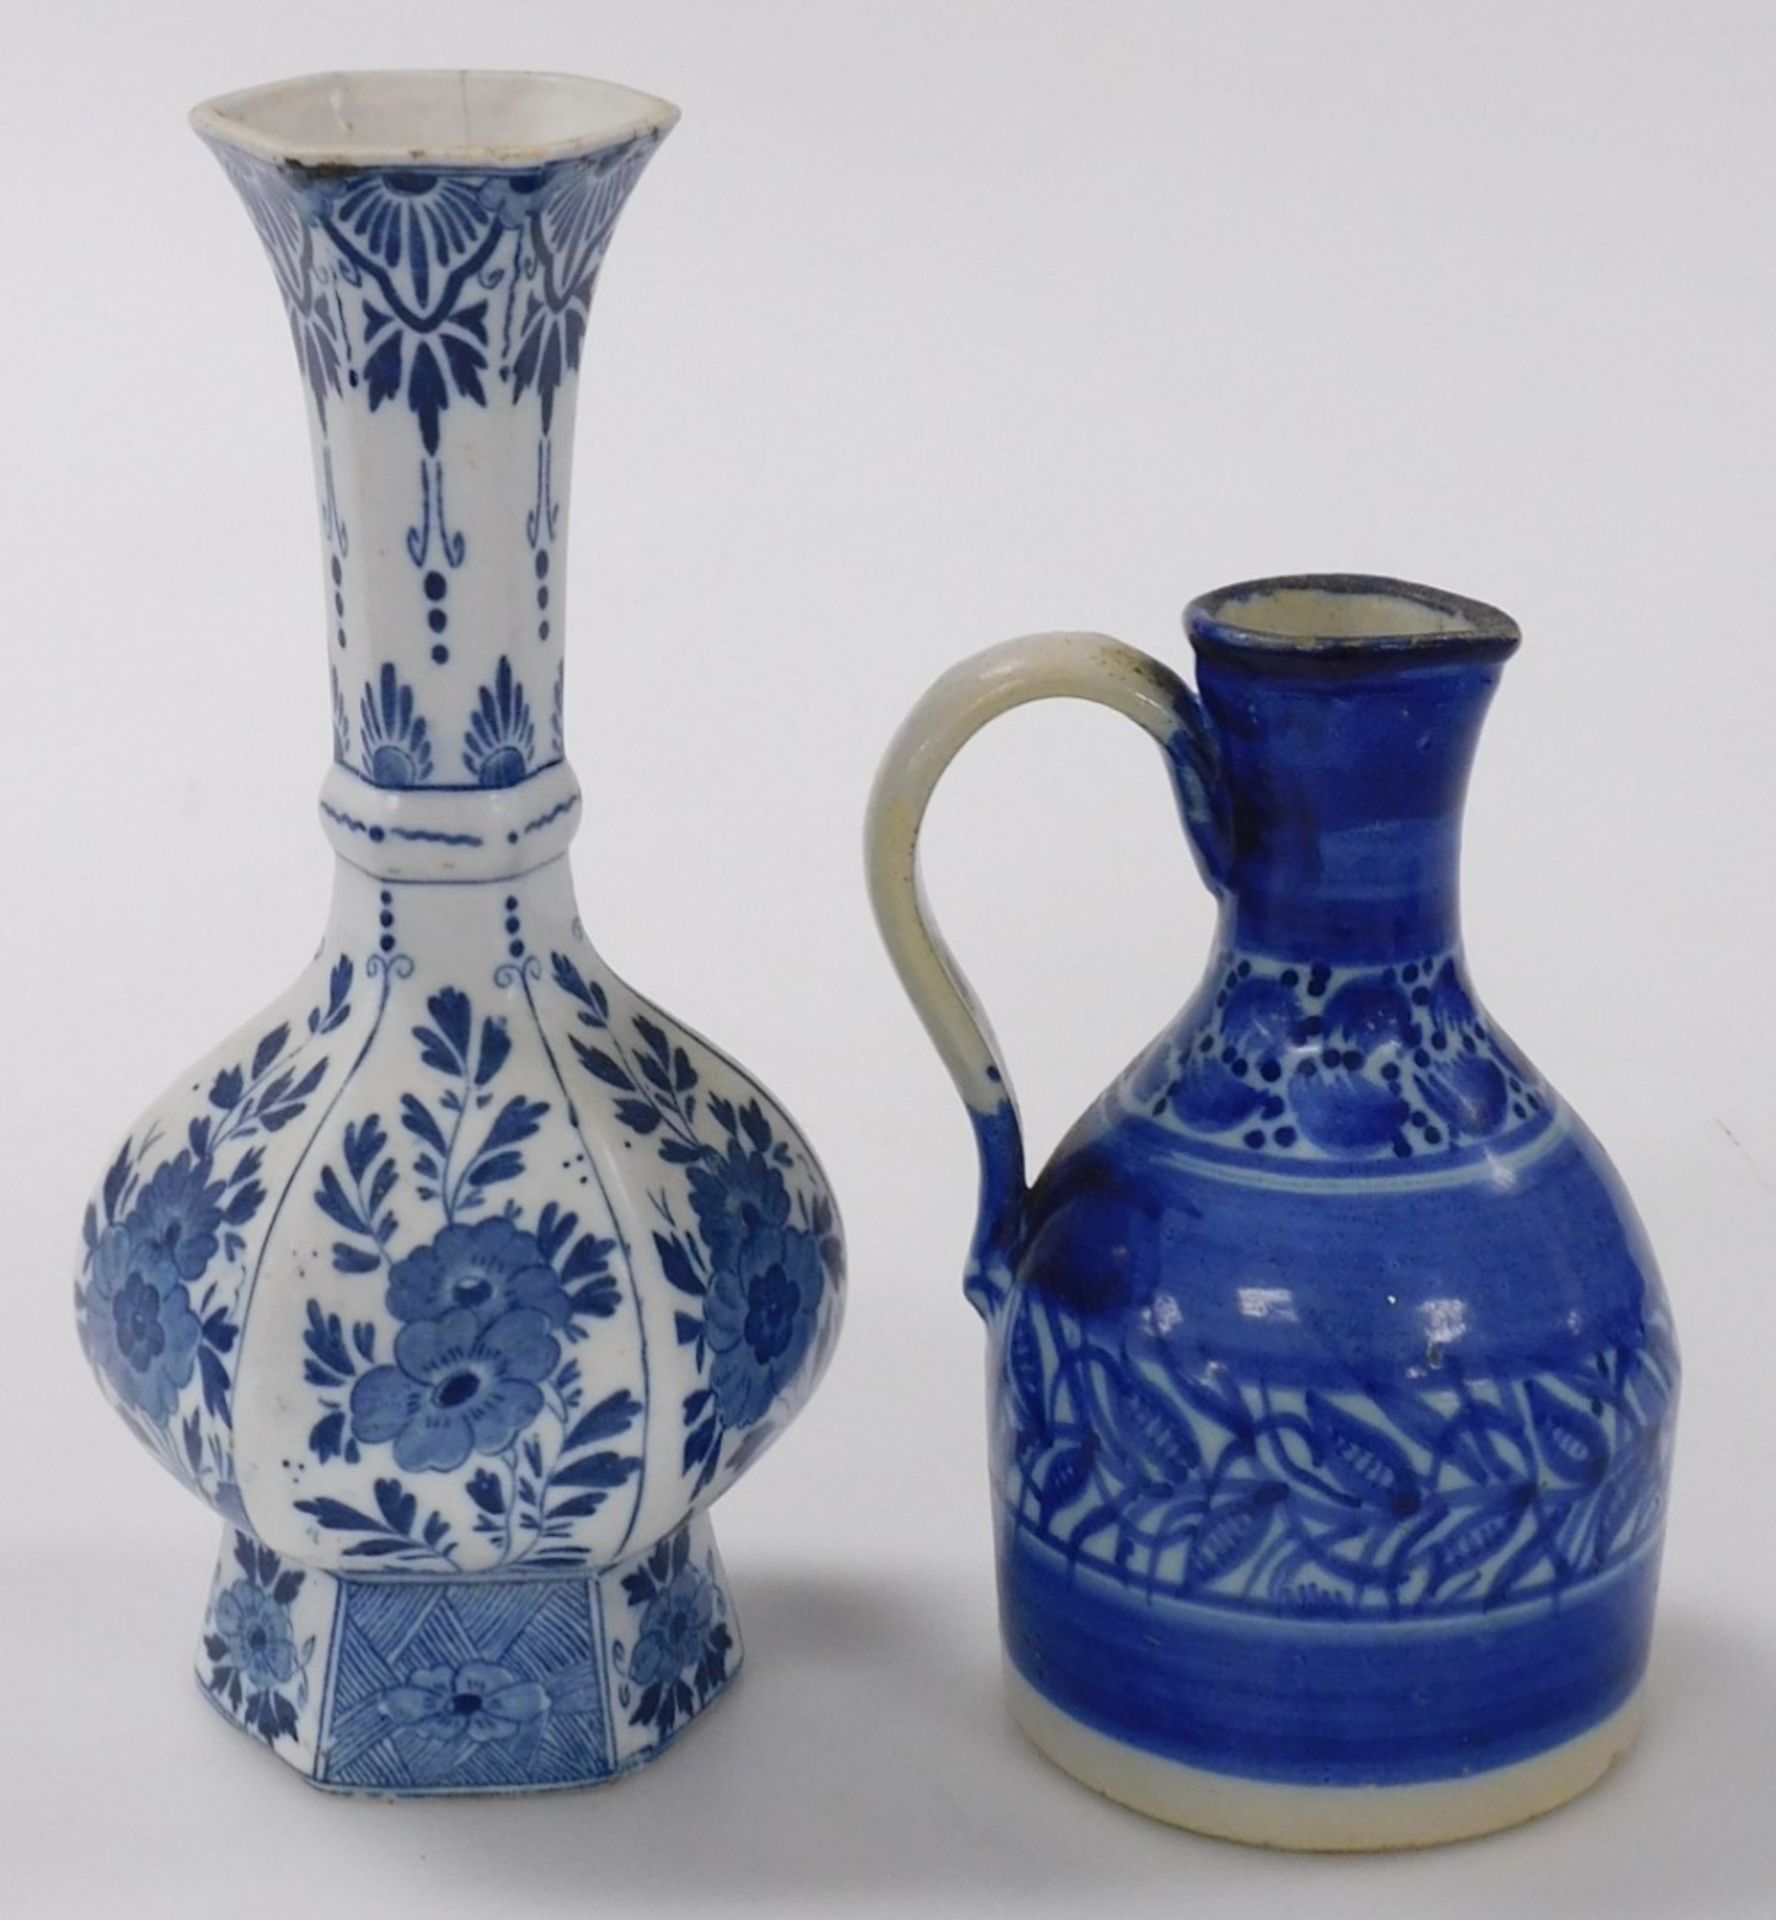 A pair of Qing Dynasty blue and white cylindrical porcelain vases, decorated with flowers, 24cm high - Image 7 of 11